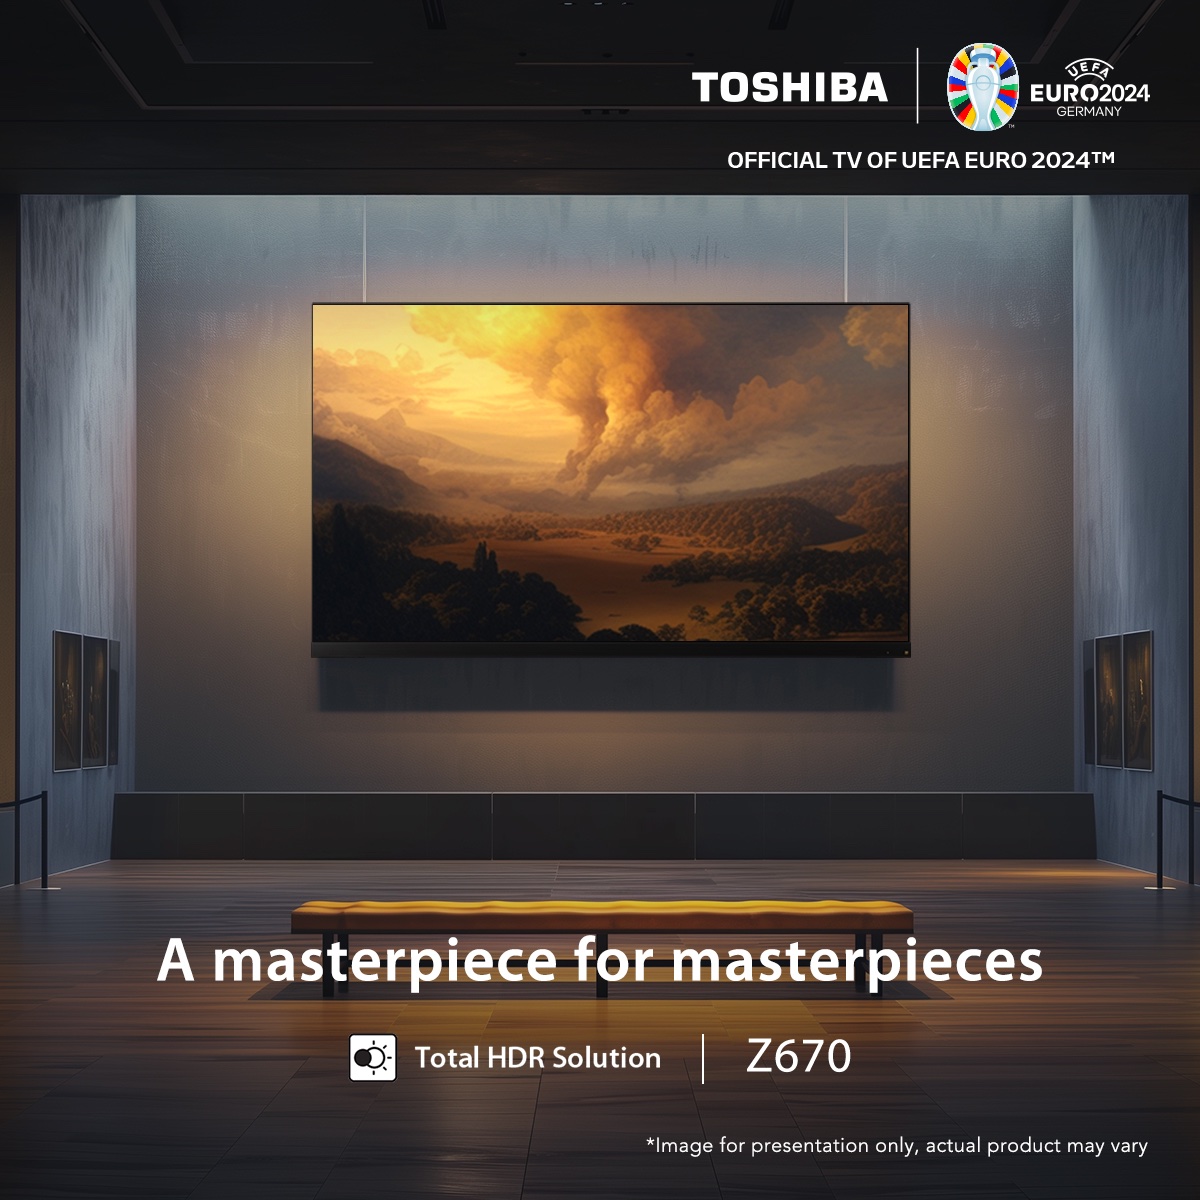 Discover art in its truest form this International Museums Day with #ToshibaTV Z670. Enjoy every masterpiece in stunning clarity. What's your favorite artwork to see in detail? Comment below, and follow for more visual perfection. #BeRealCraftsmanship